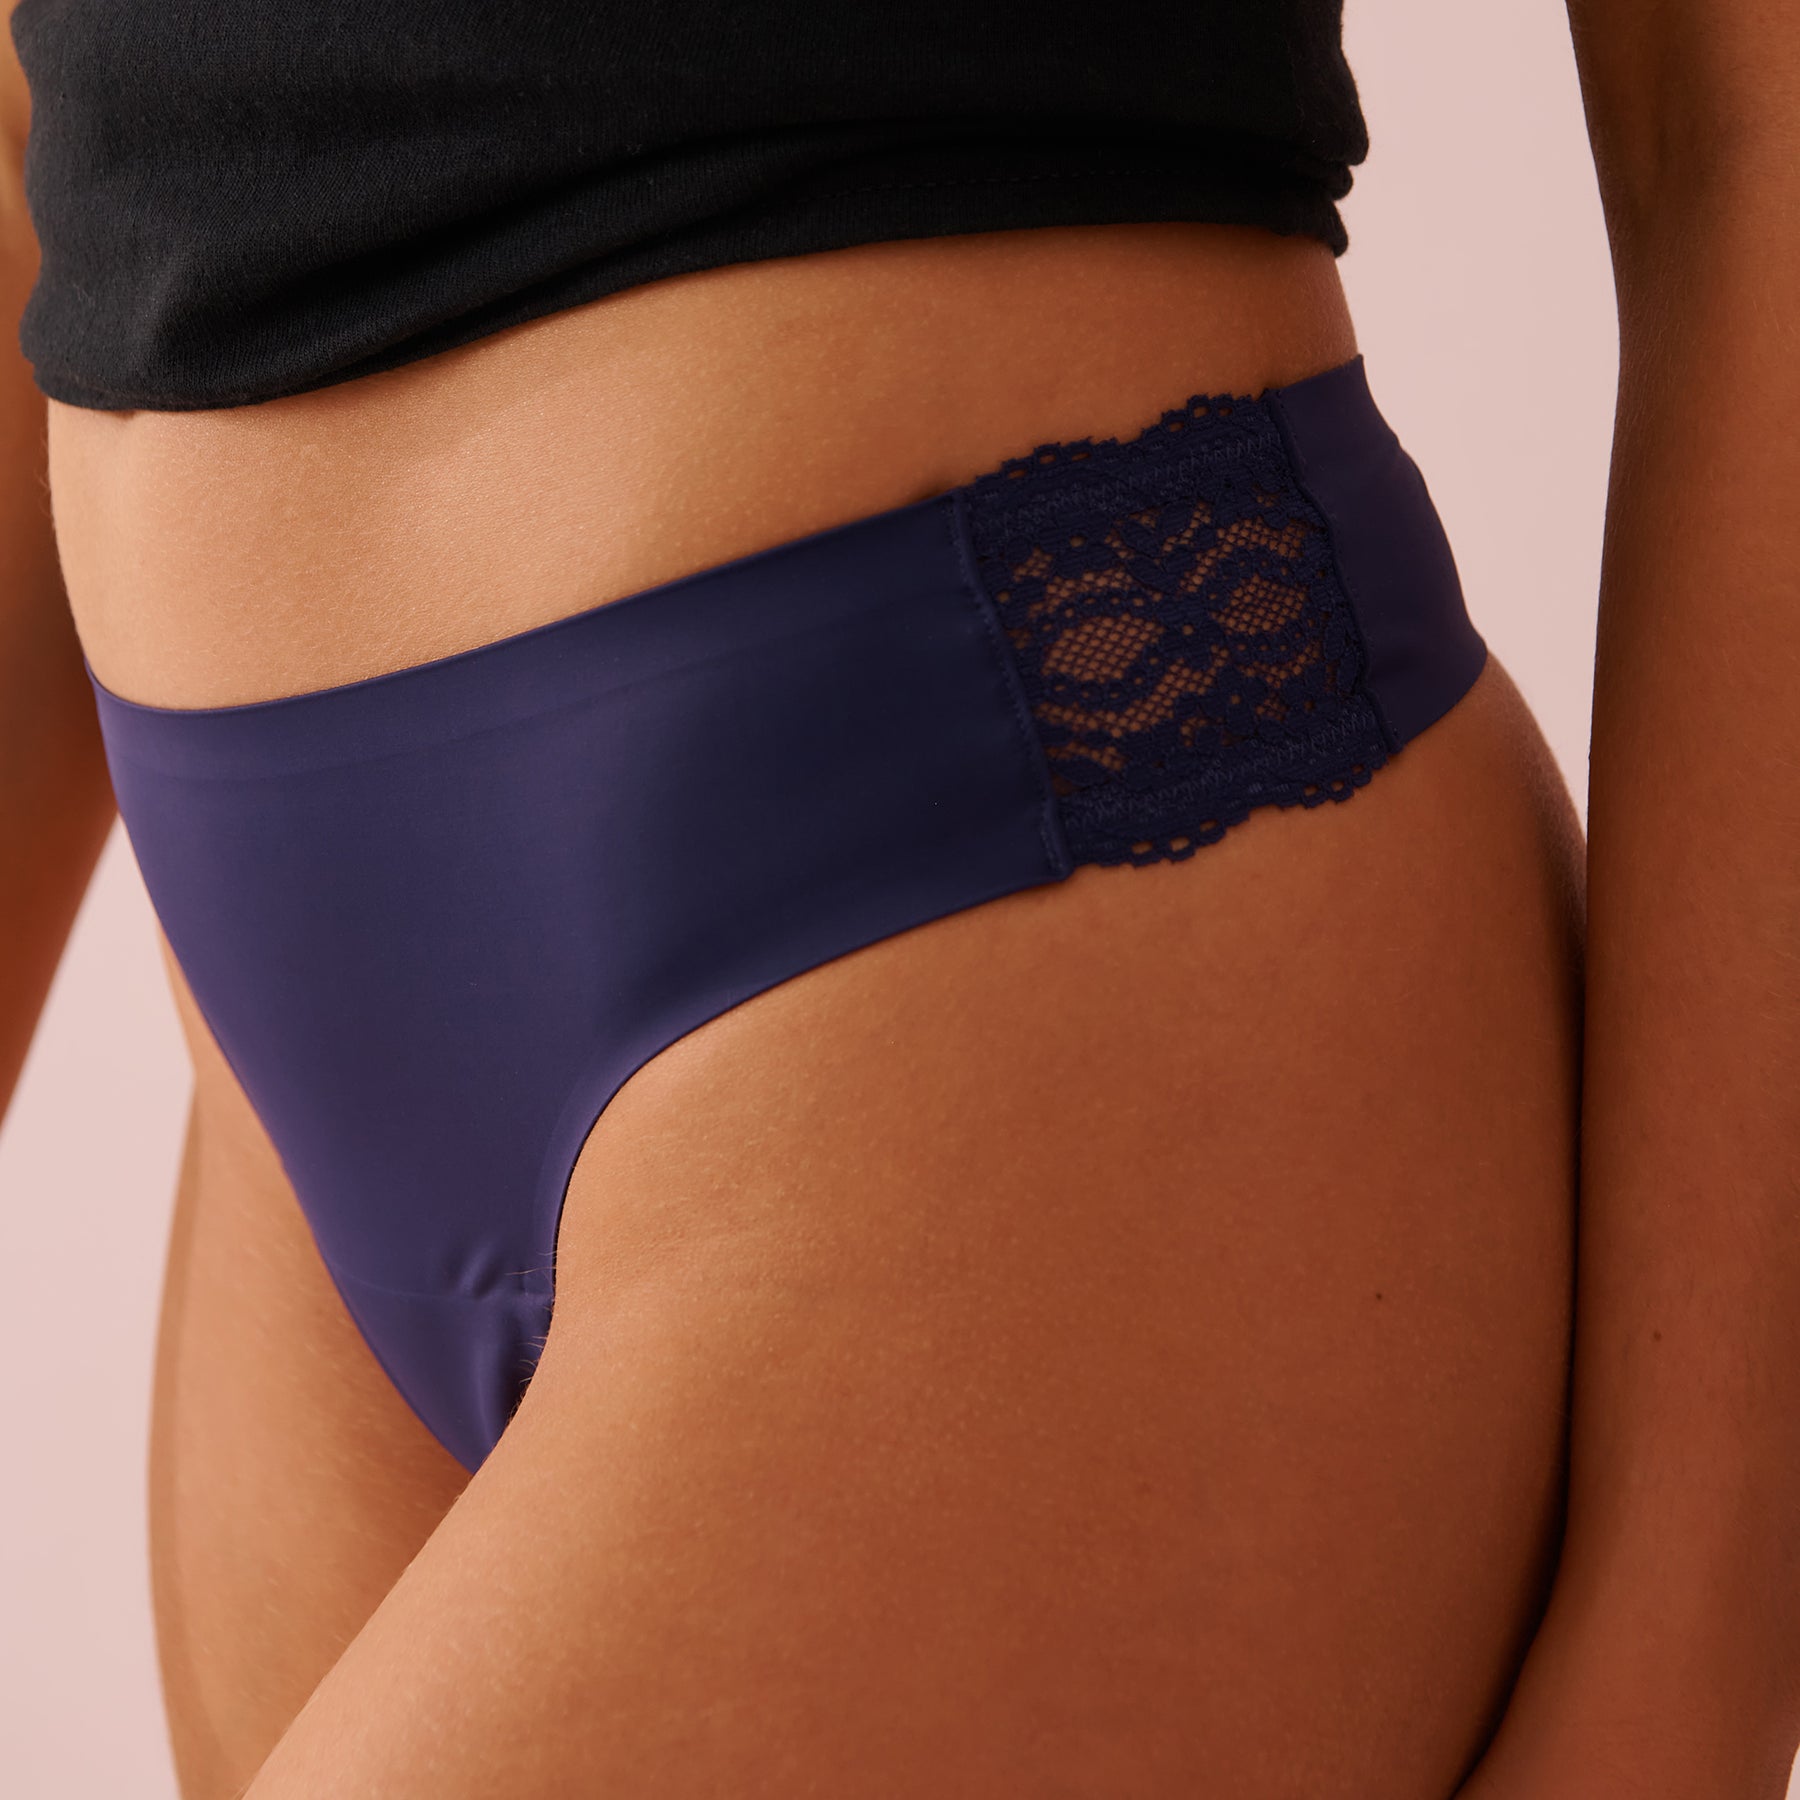 Lace detail of the purple thong period panty – NEWEX